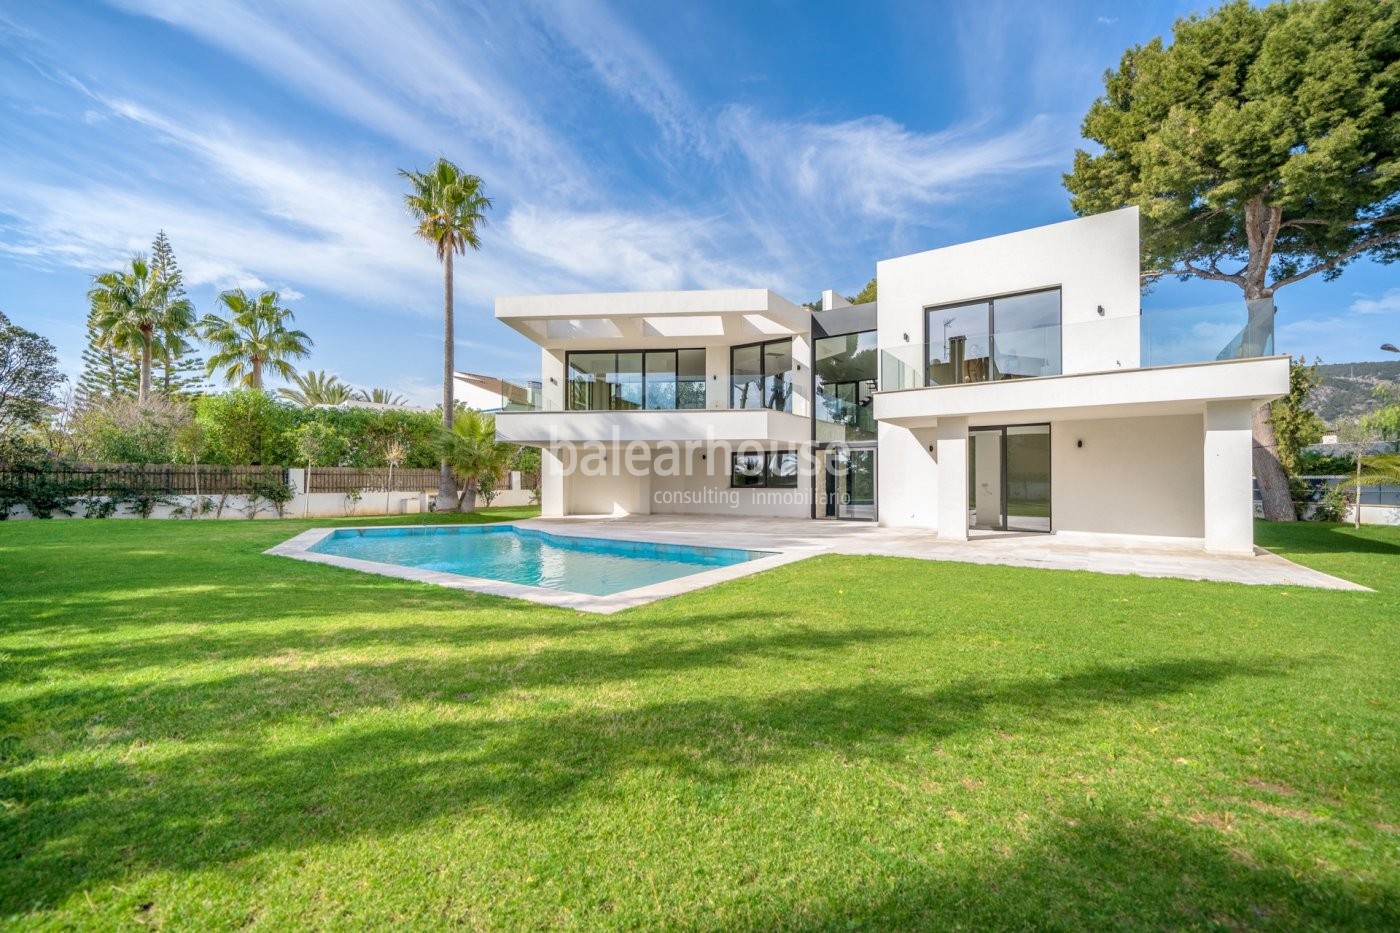 Design and light-filled spaces in this newly built villa with sea views in Cas Catalá.